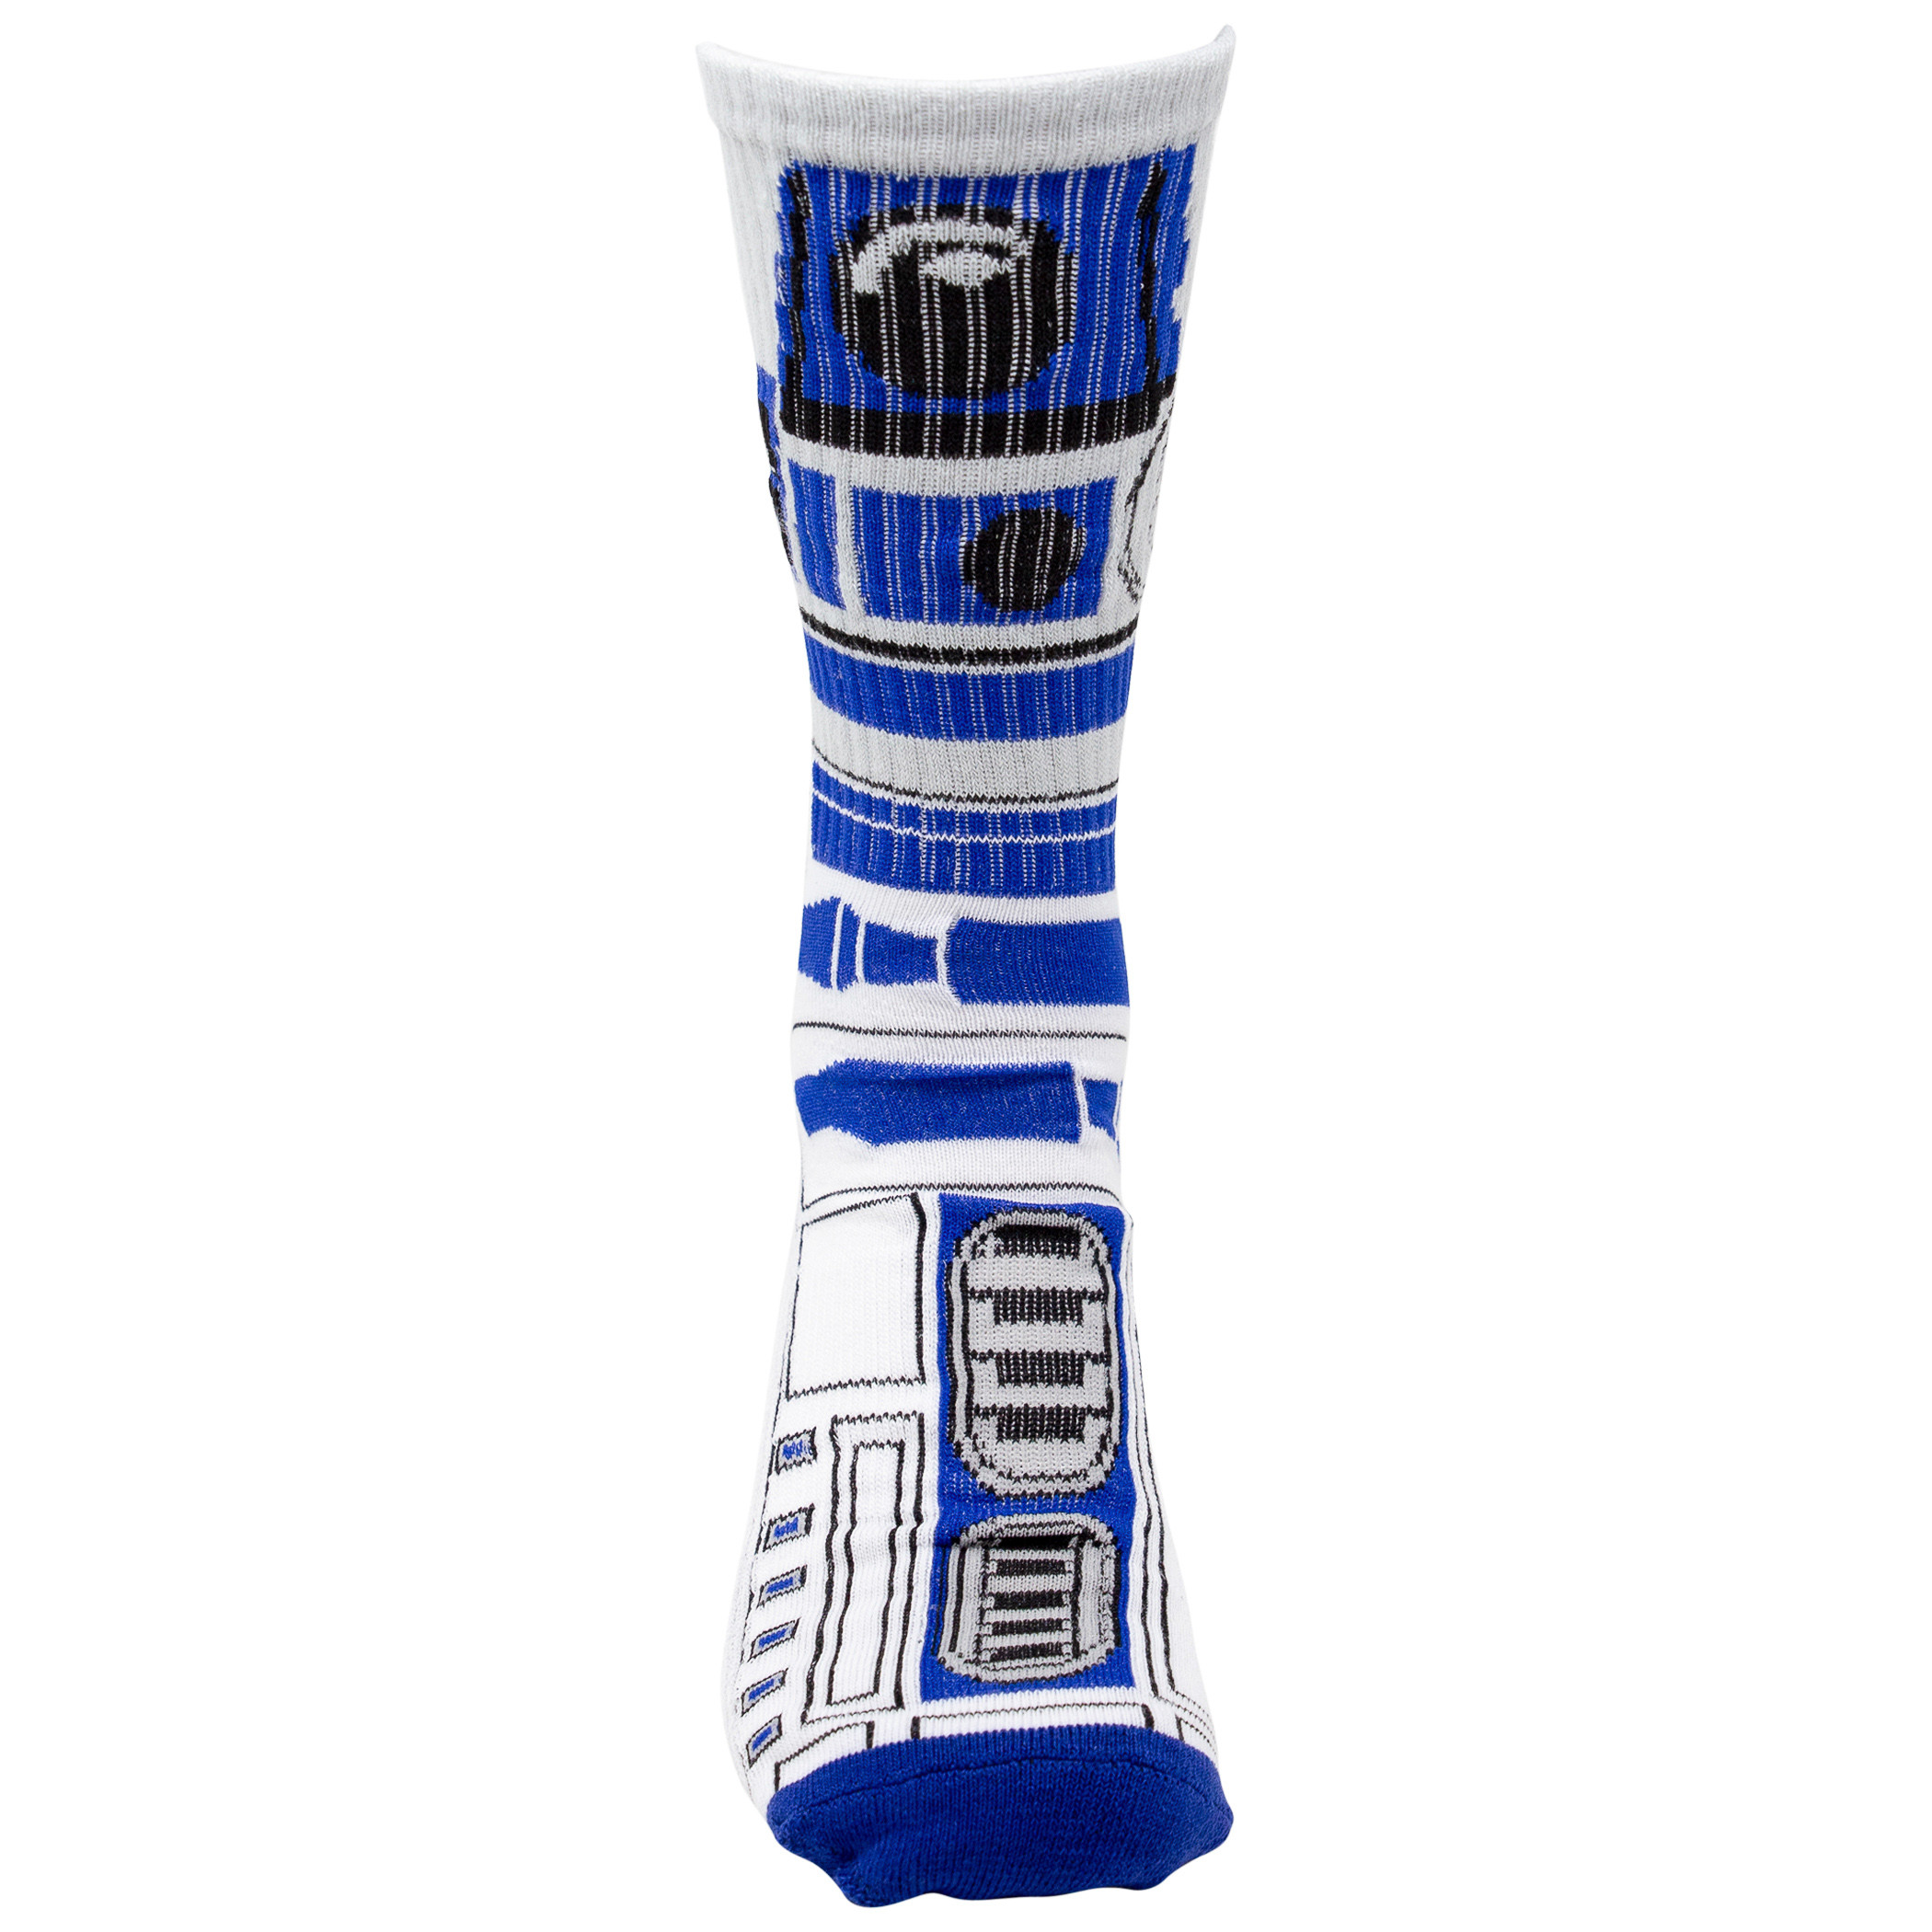 Star Wars R2-D2 and C-3PO Character Socks 2-Pair Pack